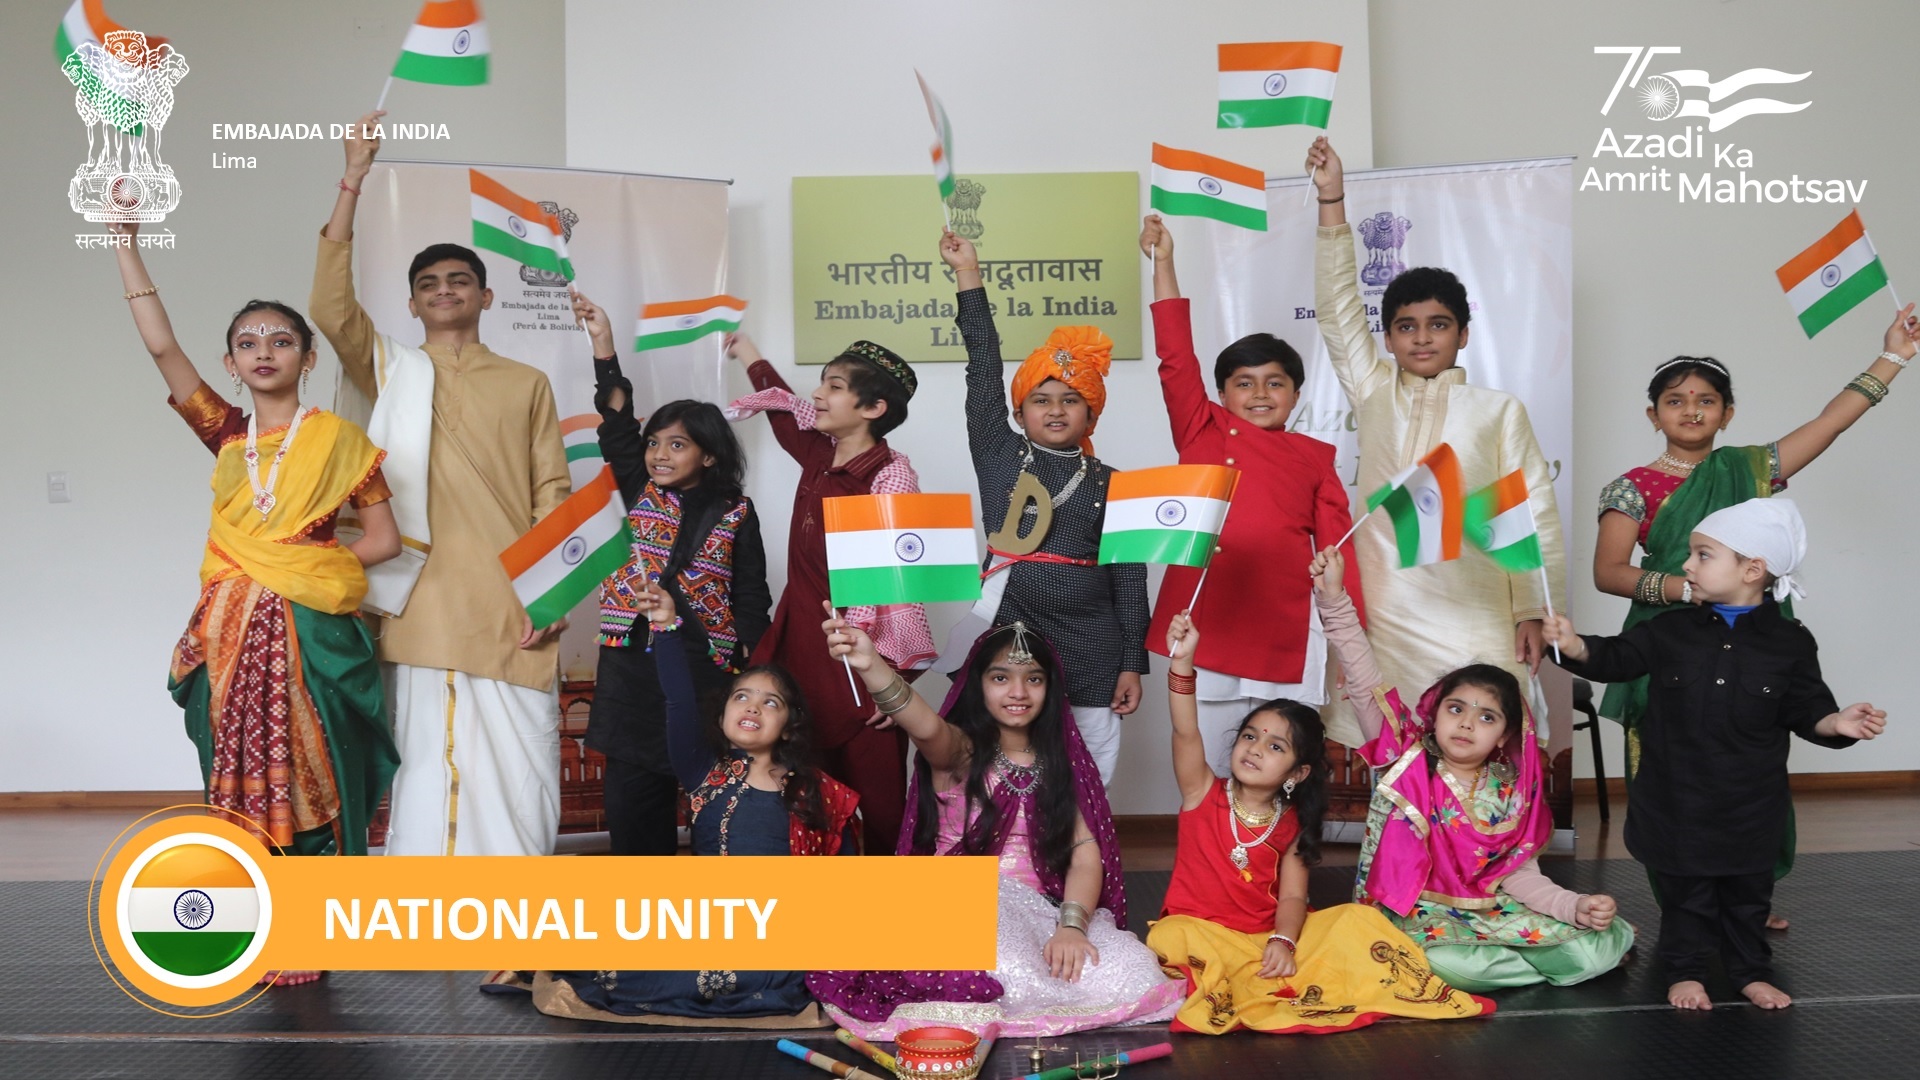 As part of #AmritMahotsav celebrations  @eoilima  organised virtual events on "National Unity", including screening of a documentary on the life of Sardar Vallabhbhai Patel & a painting competition themed "Unity in Diversity"